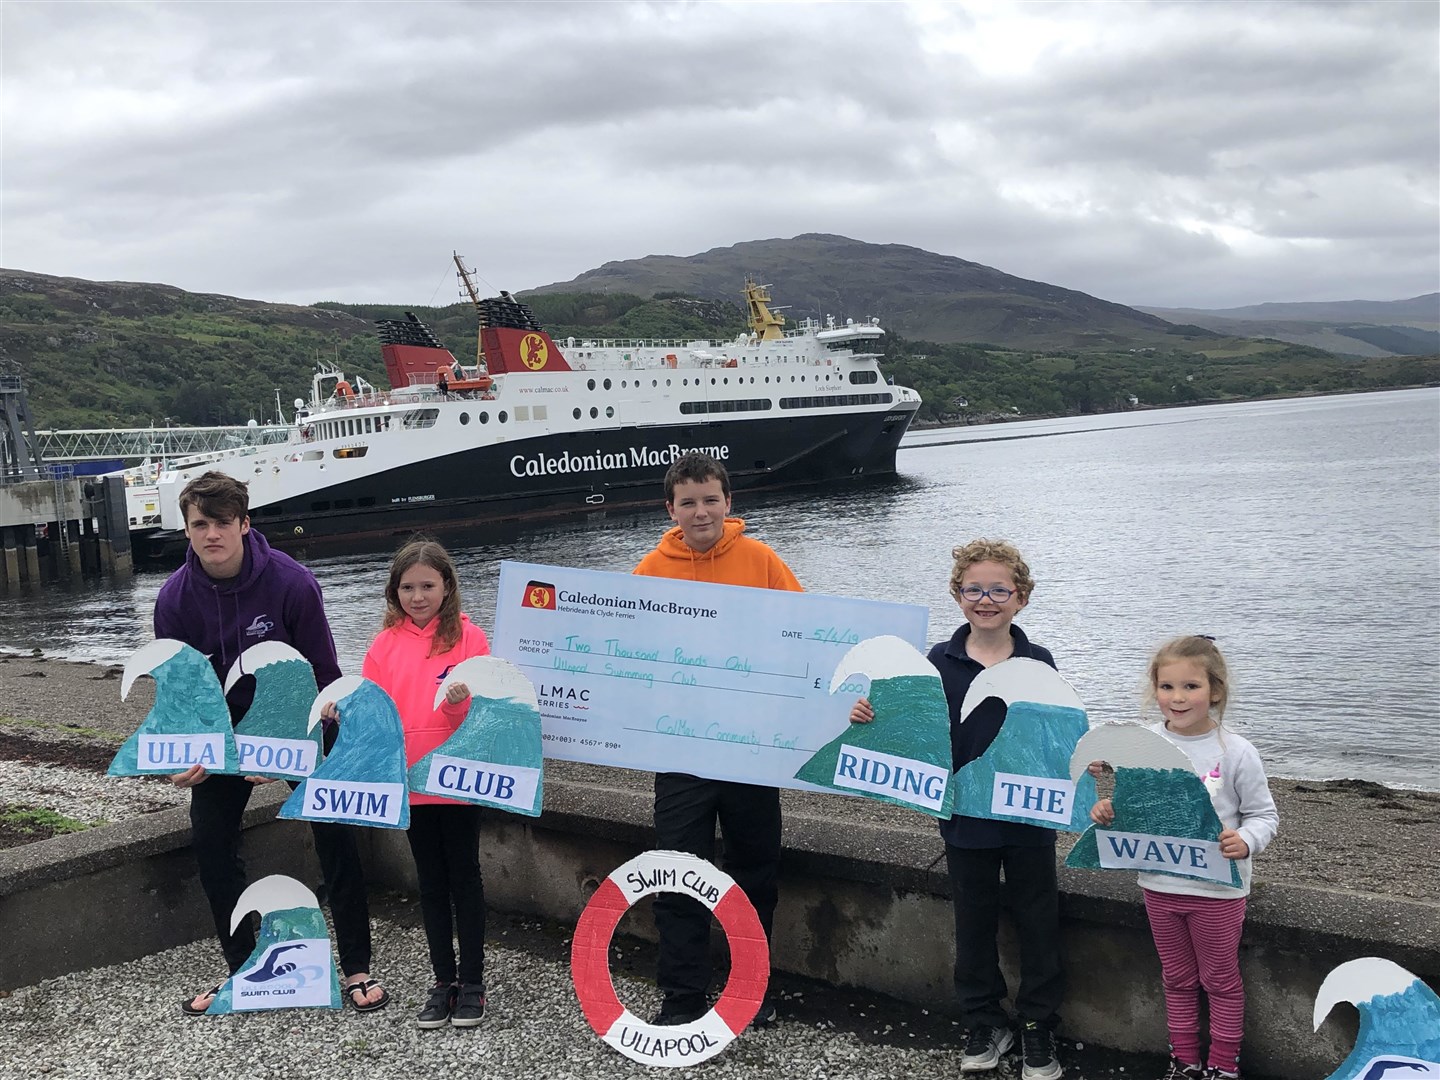 Ullapool Swim Club has been a previous recipient of money through the fund.